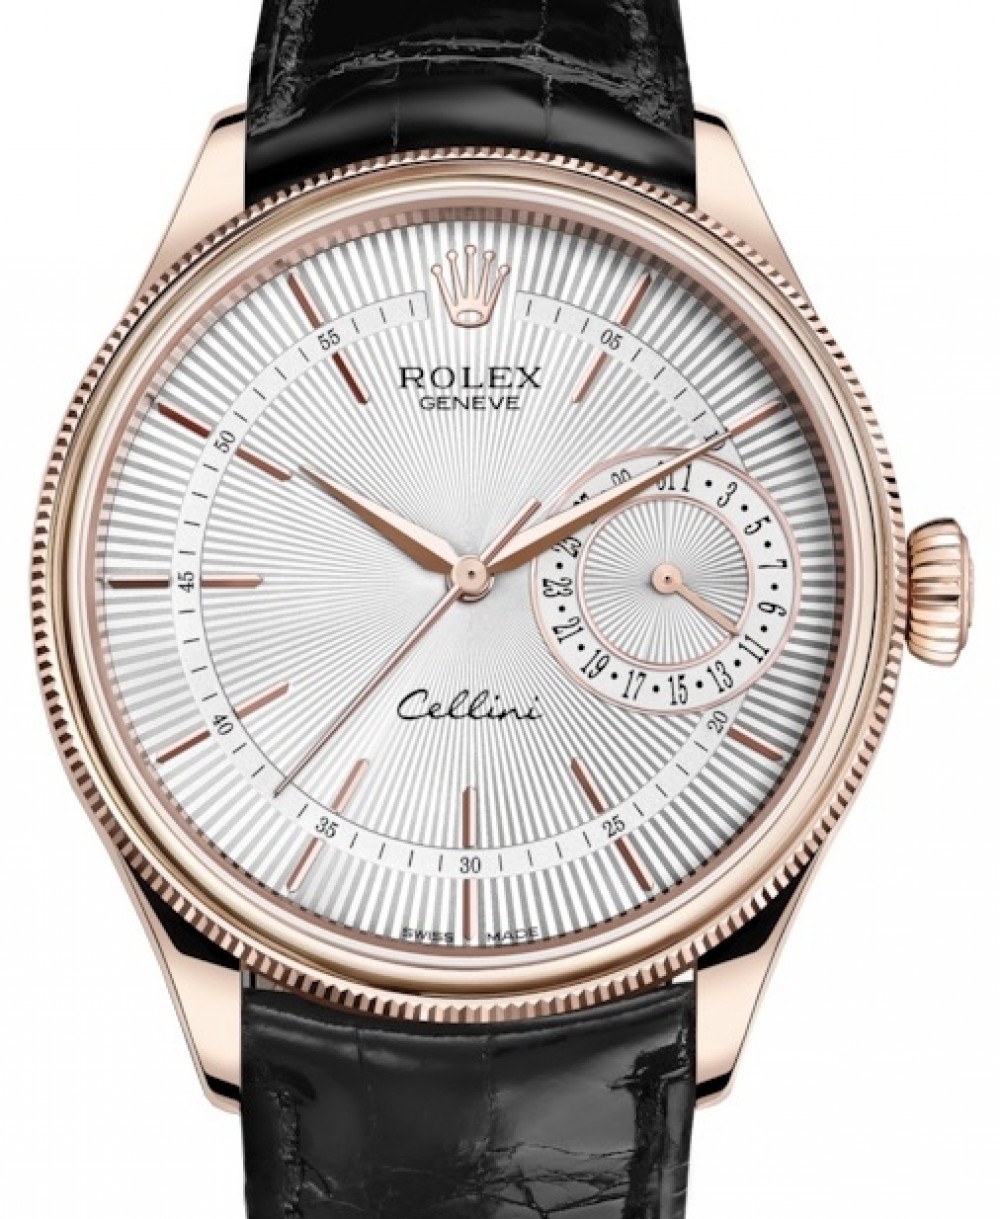 Rolex Cellini Date Rose Gold Silver Index Dial Domed & Fluted Double Bezel Black Leather Bracelet 50515 - BRAND NEW